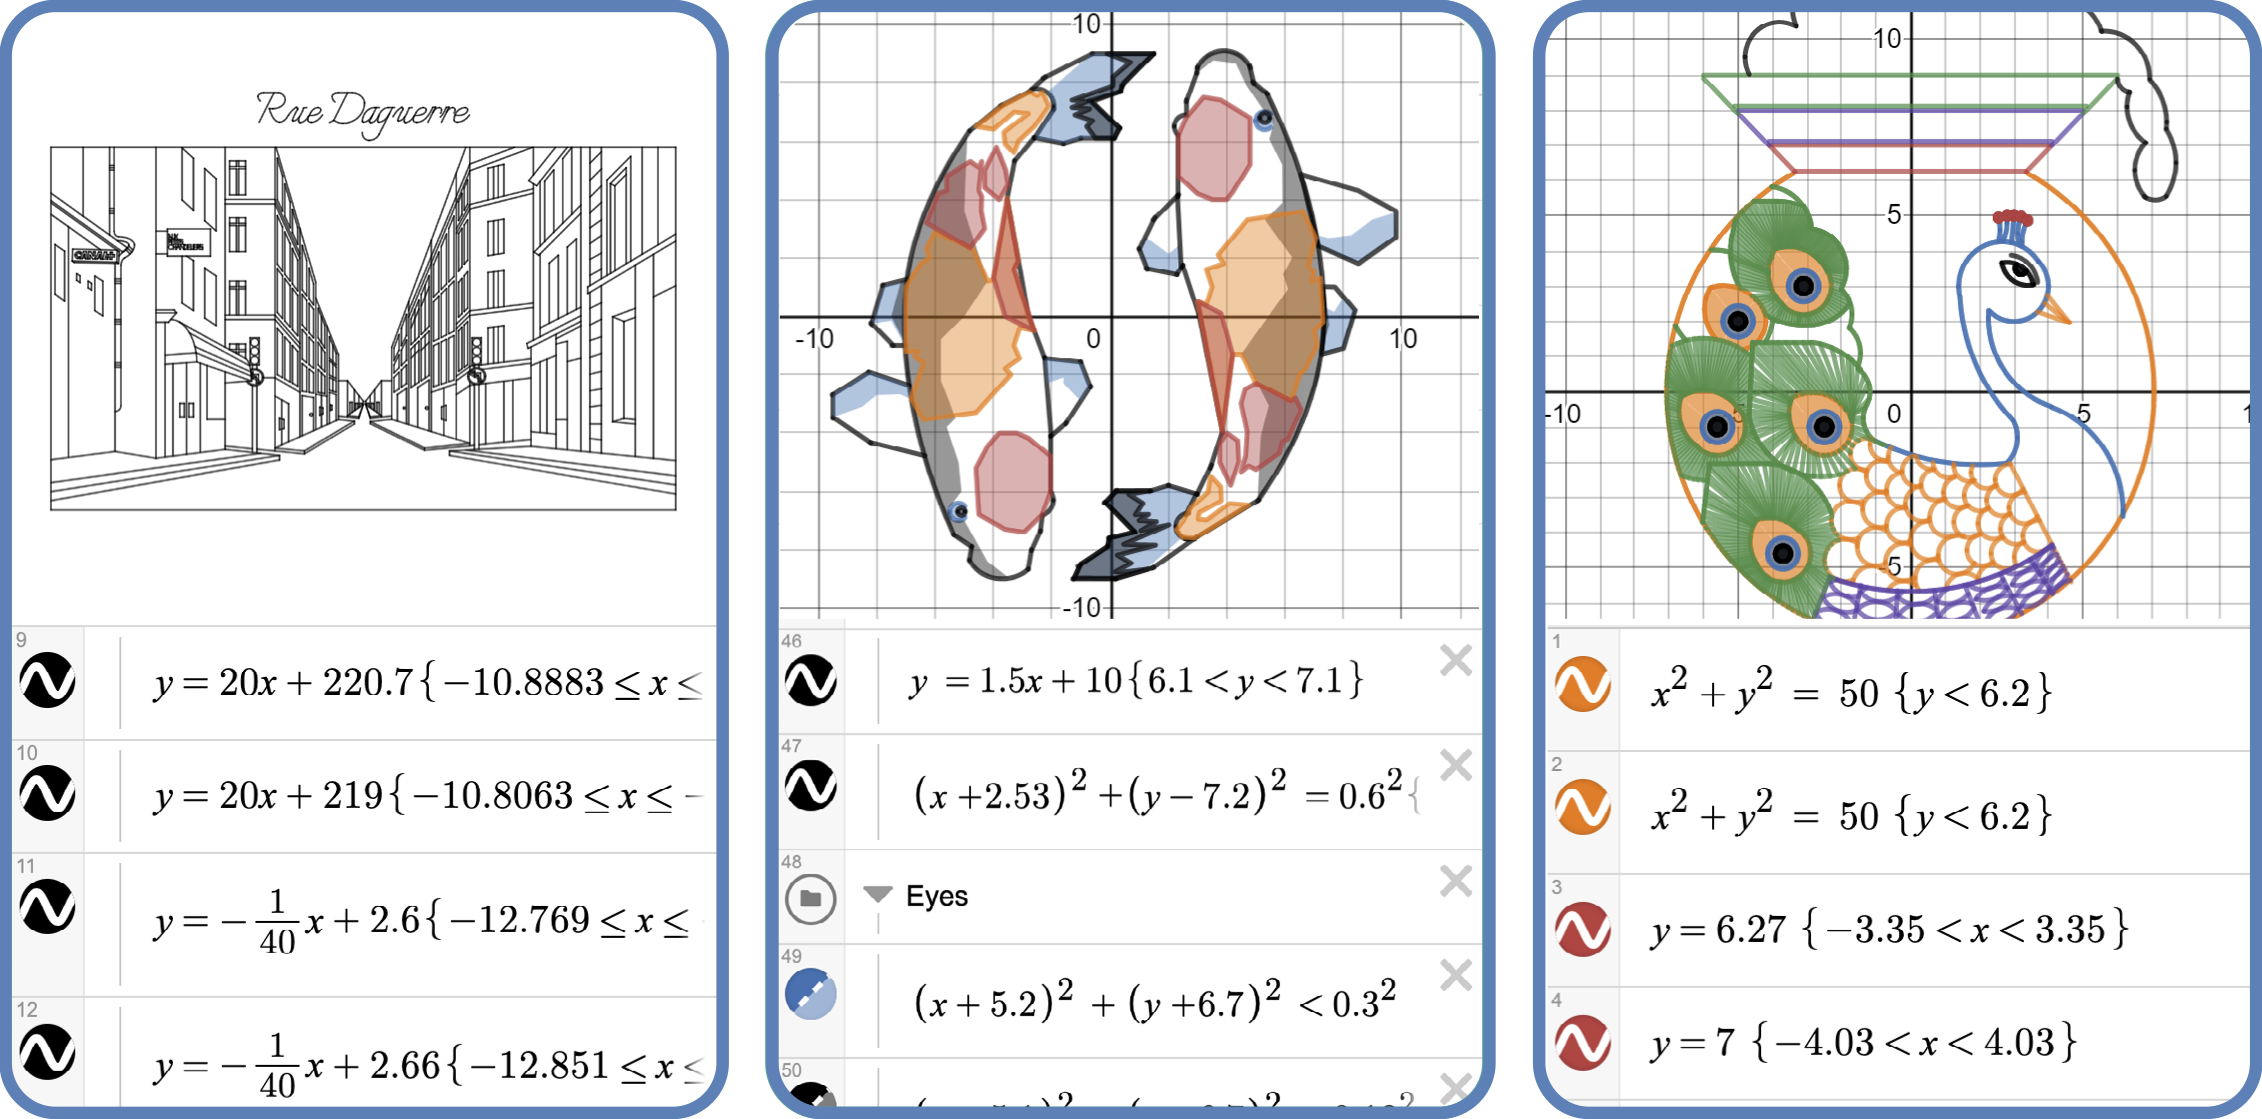 Three artistic graphs—a streetscape, two goldfish, and a peacock—together with a peek at some of the equations that generated them.)